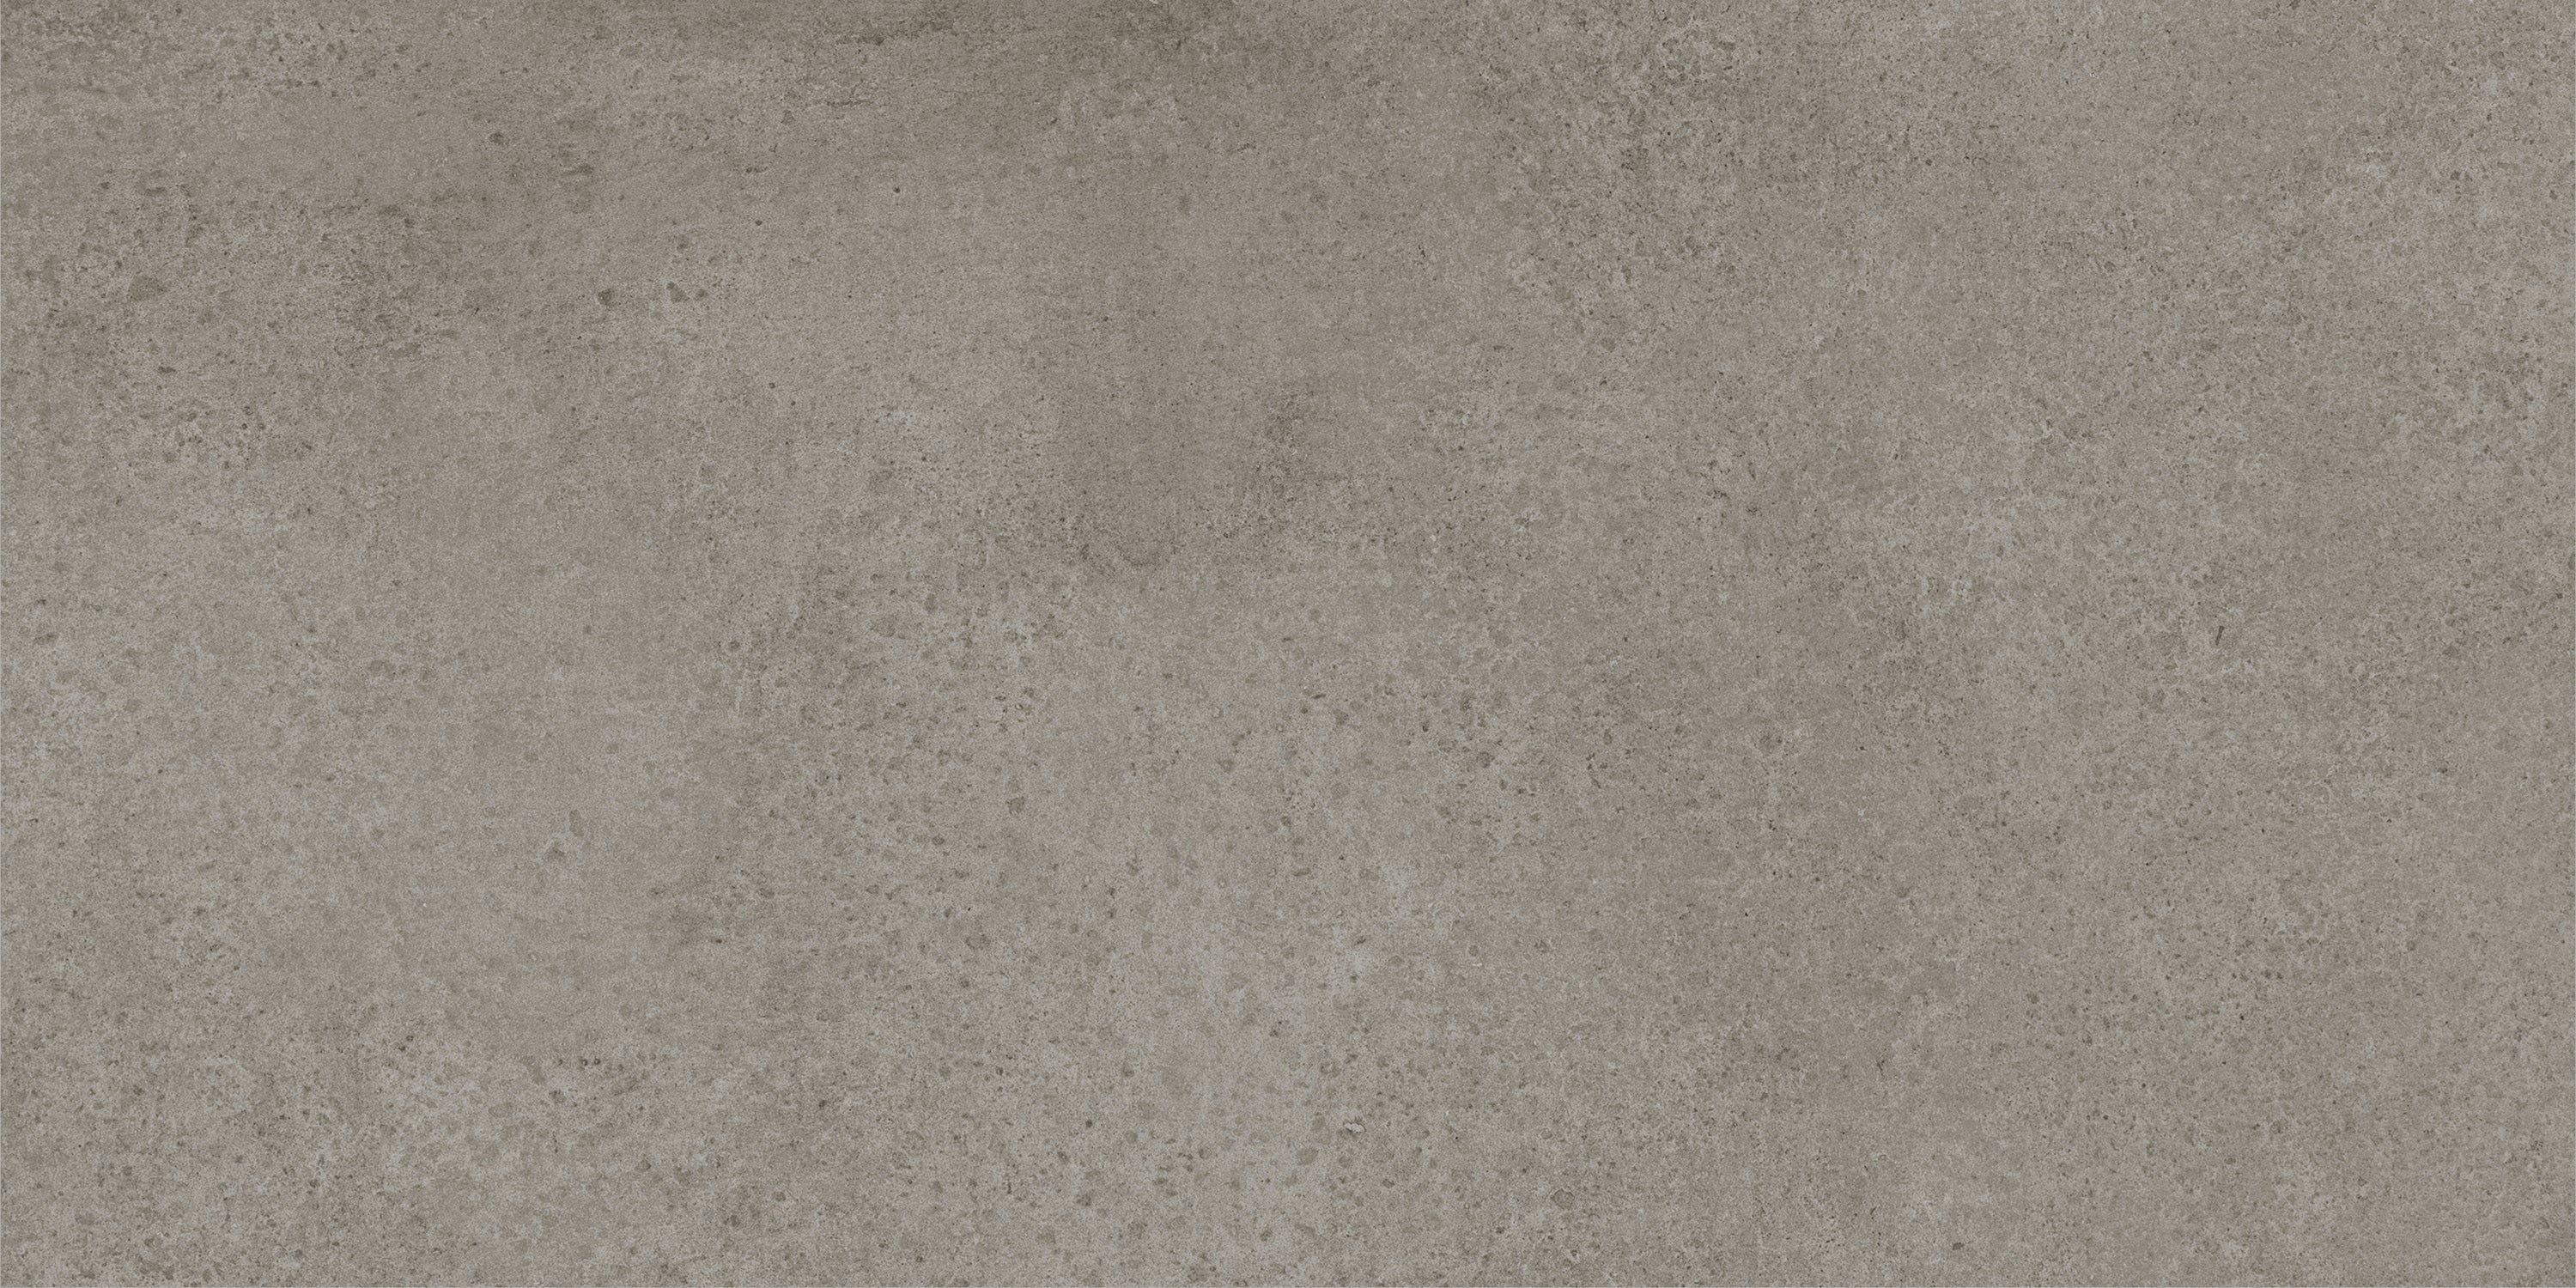 landmark 9mm madein vision grey field tile 12x24x9mm matte rectified porcelain tile distributed by surface group international